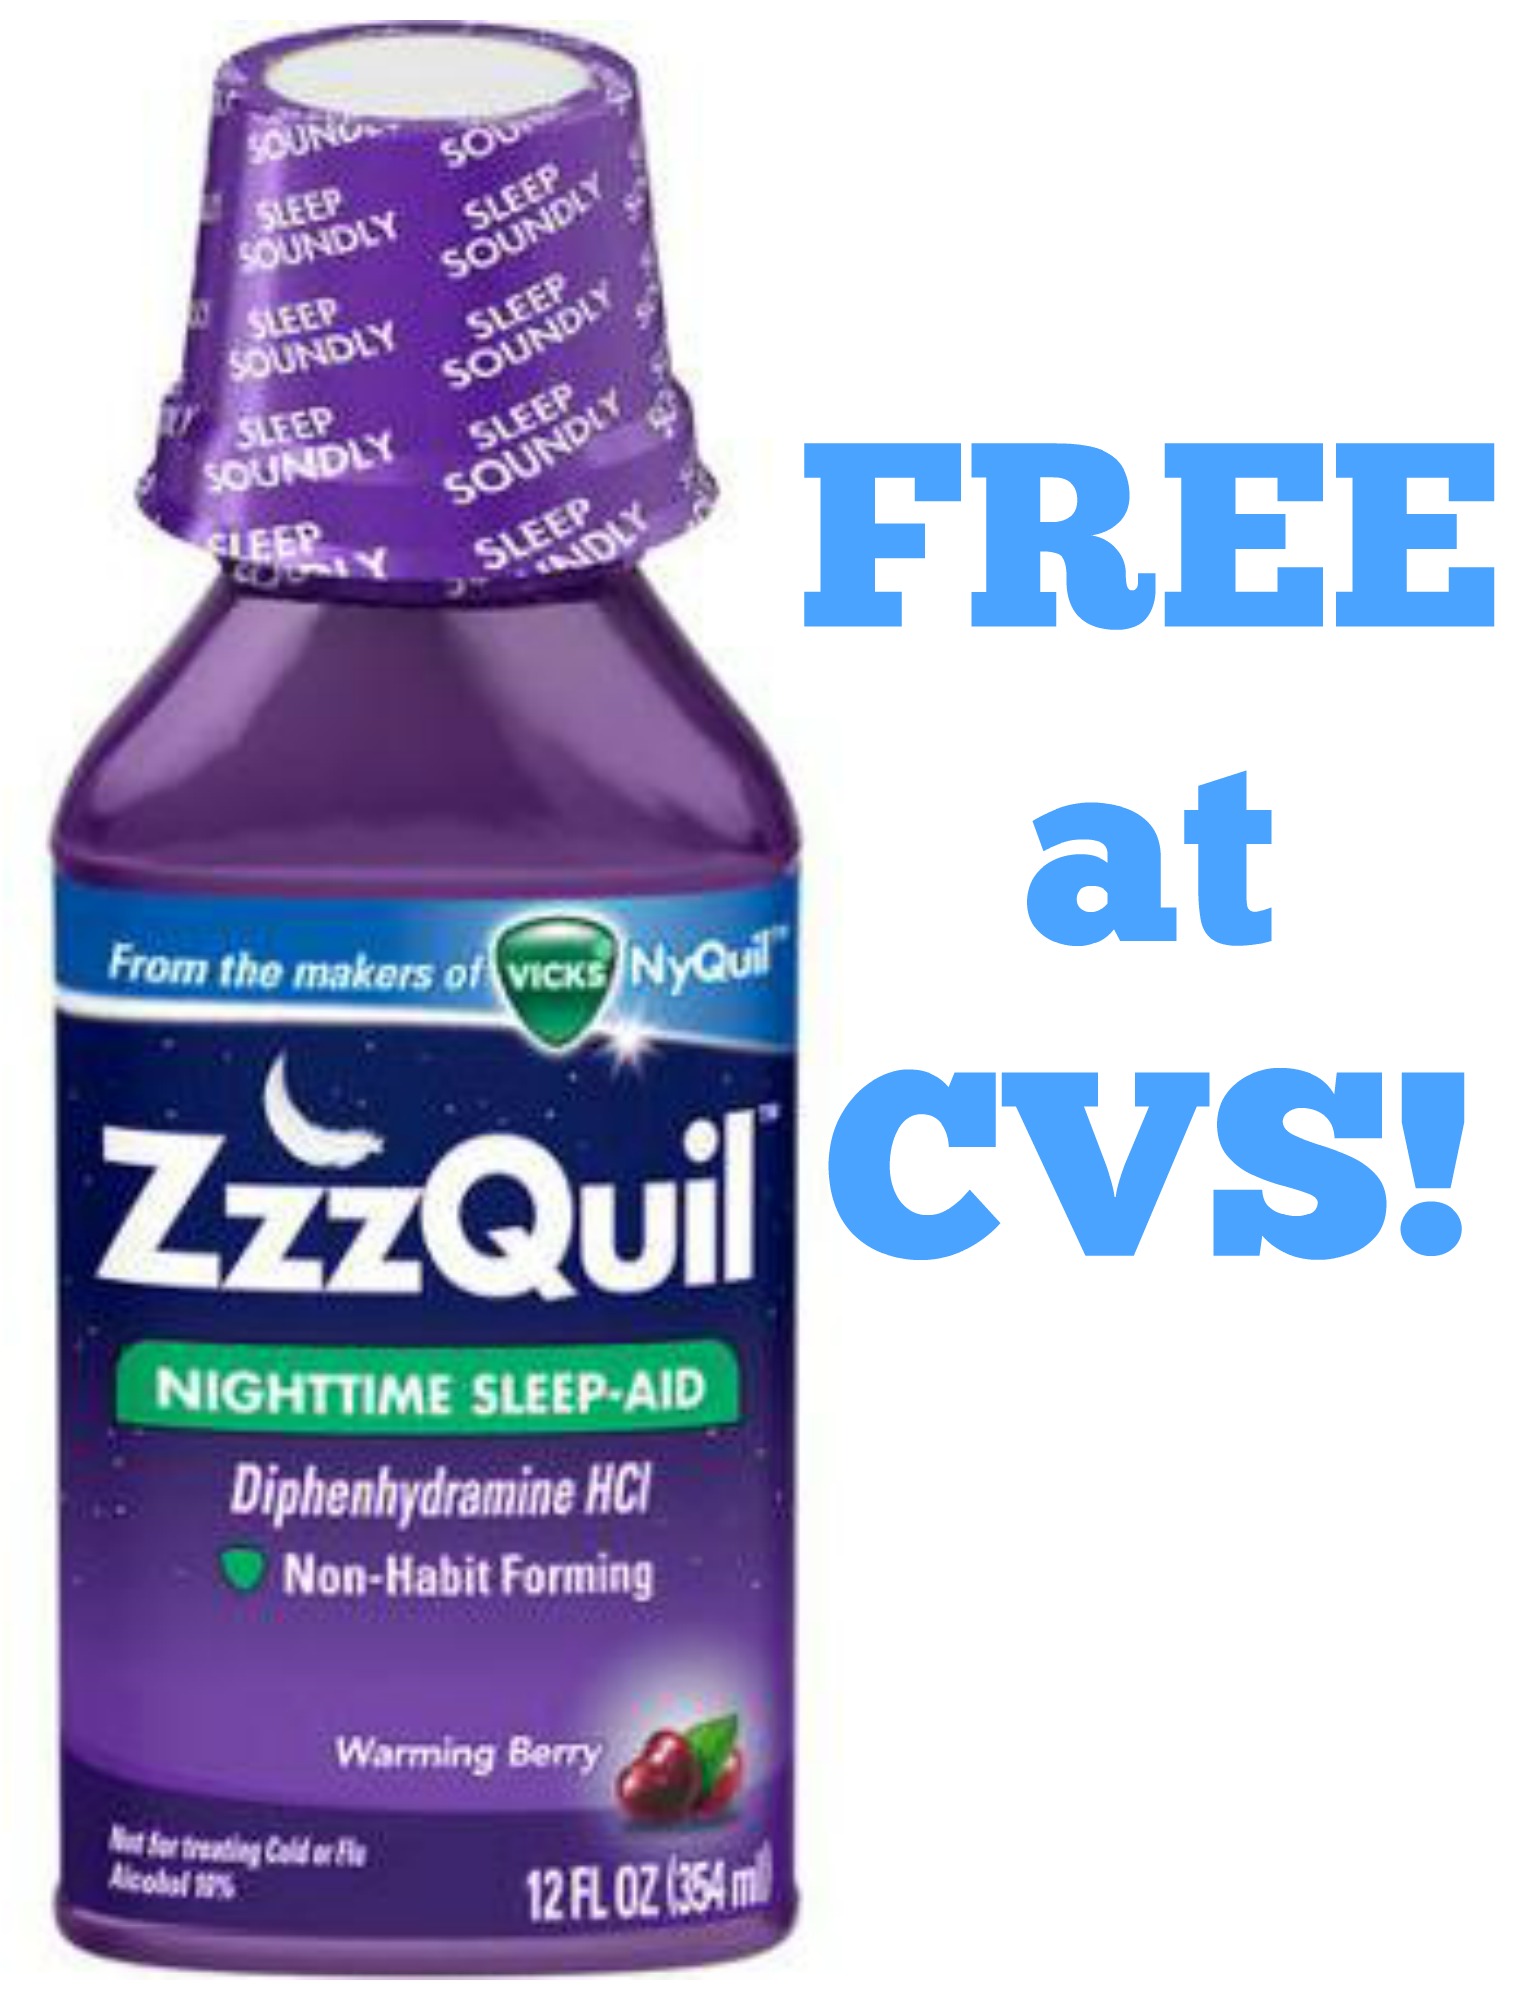 free zzzquil a2s